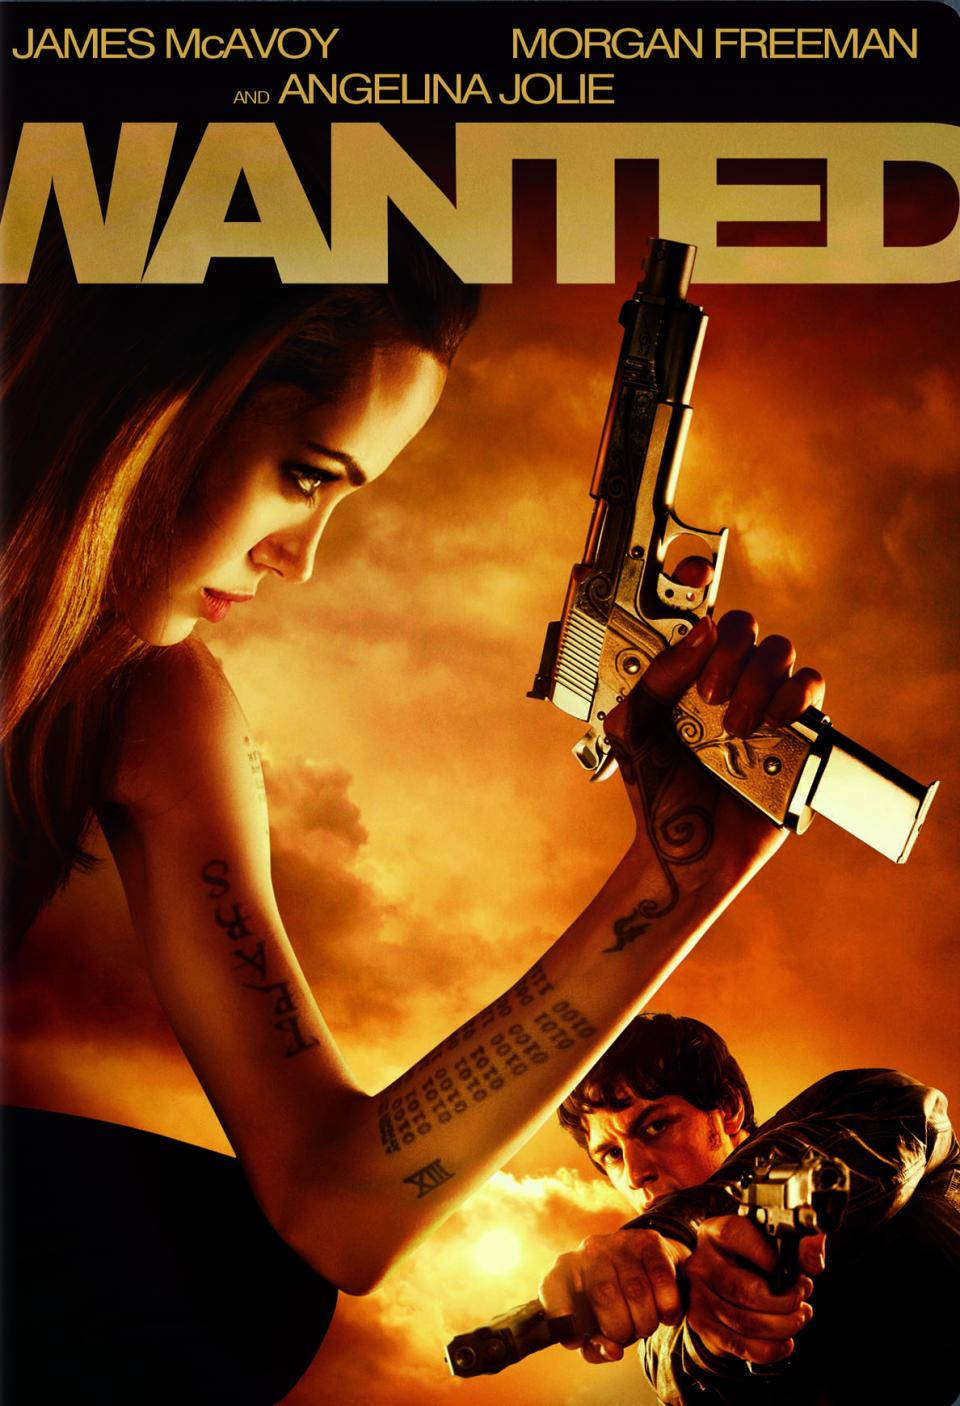 Image - Wanted-movie-poster-angelina-jolie-and-james-mcavoy.jpg
Cinemorgue Wiki FANDOM